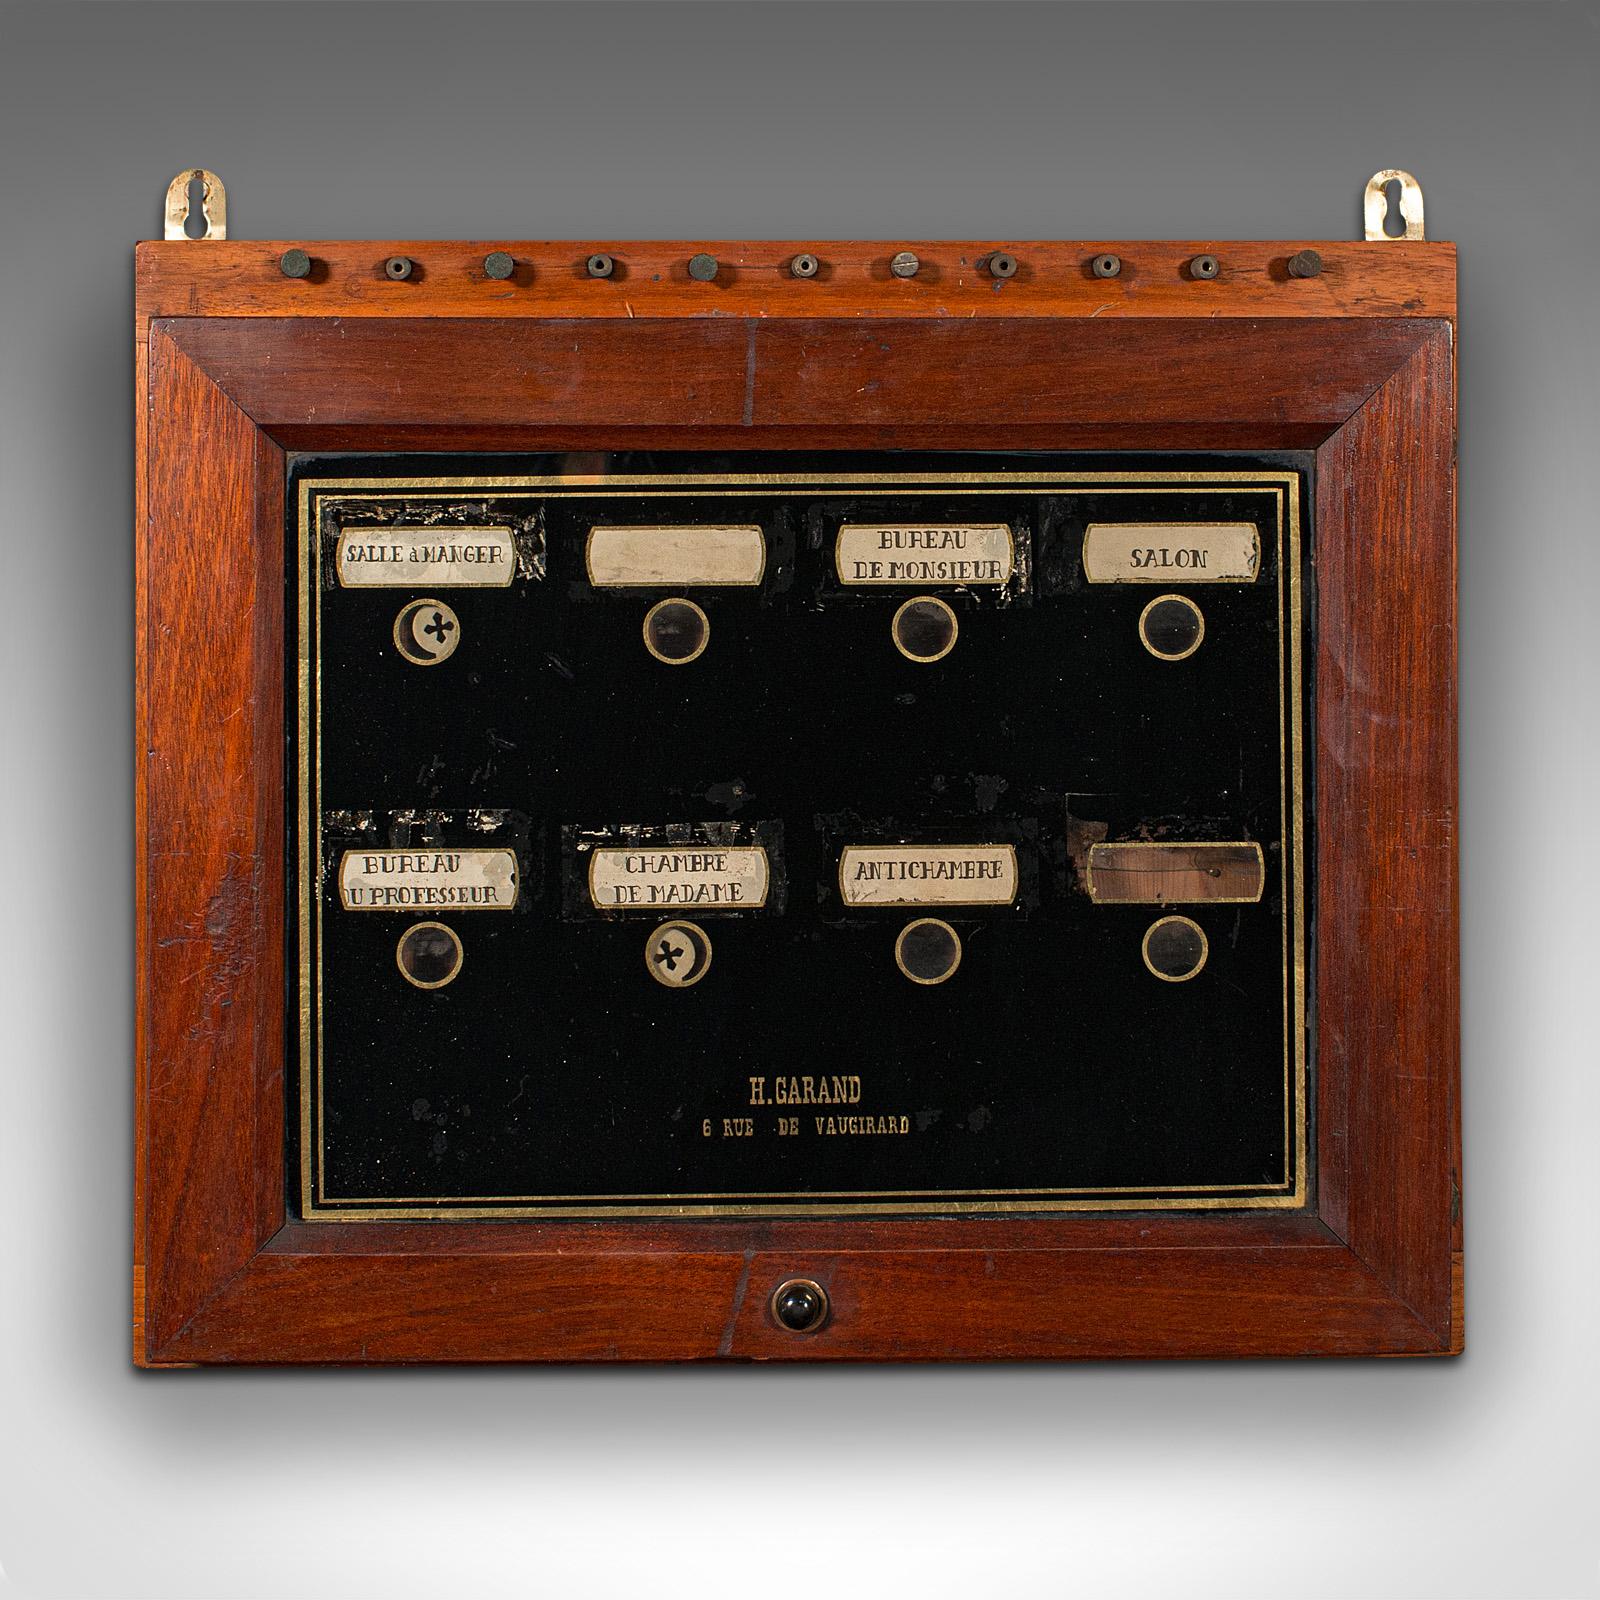 This is an antique butler's bell board. A French oak, pine and glass room alarm panel, dating to the late Victorian period, circa 1900.

Charming butler's alarm panel, with French collector's appeal
Displays a desirable aged patina and in good